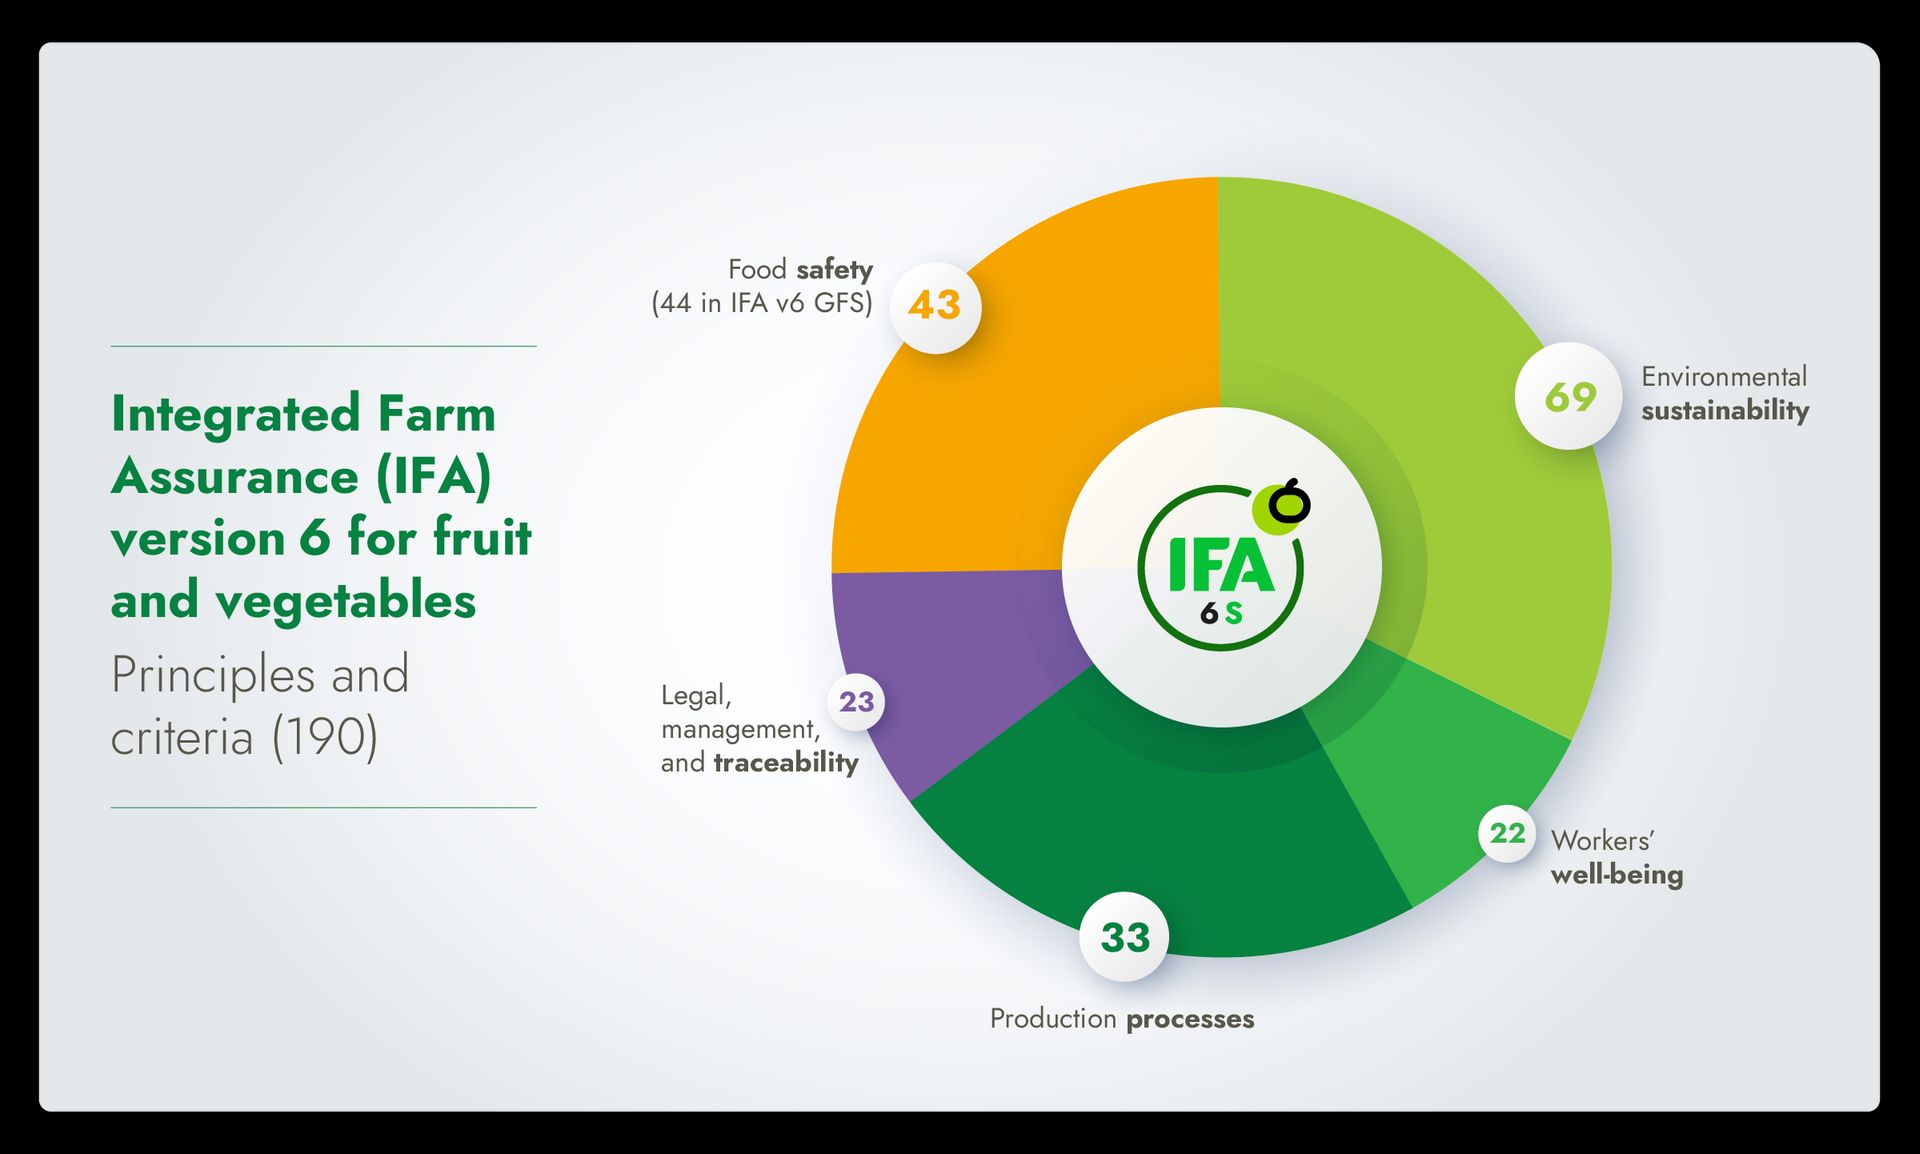 Infographic showing the breakdown of principles and criteria of Integrated Farm Assurance version 6 for fruit and vegetables